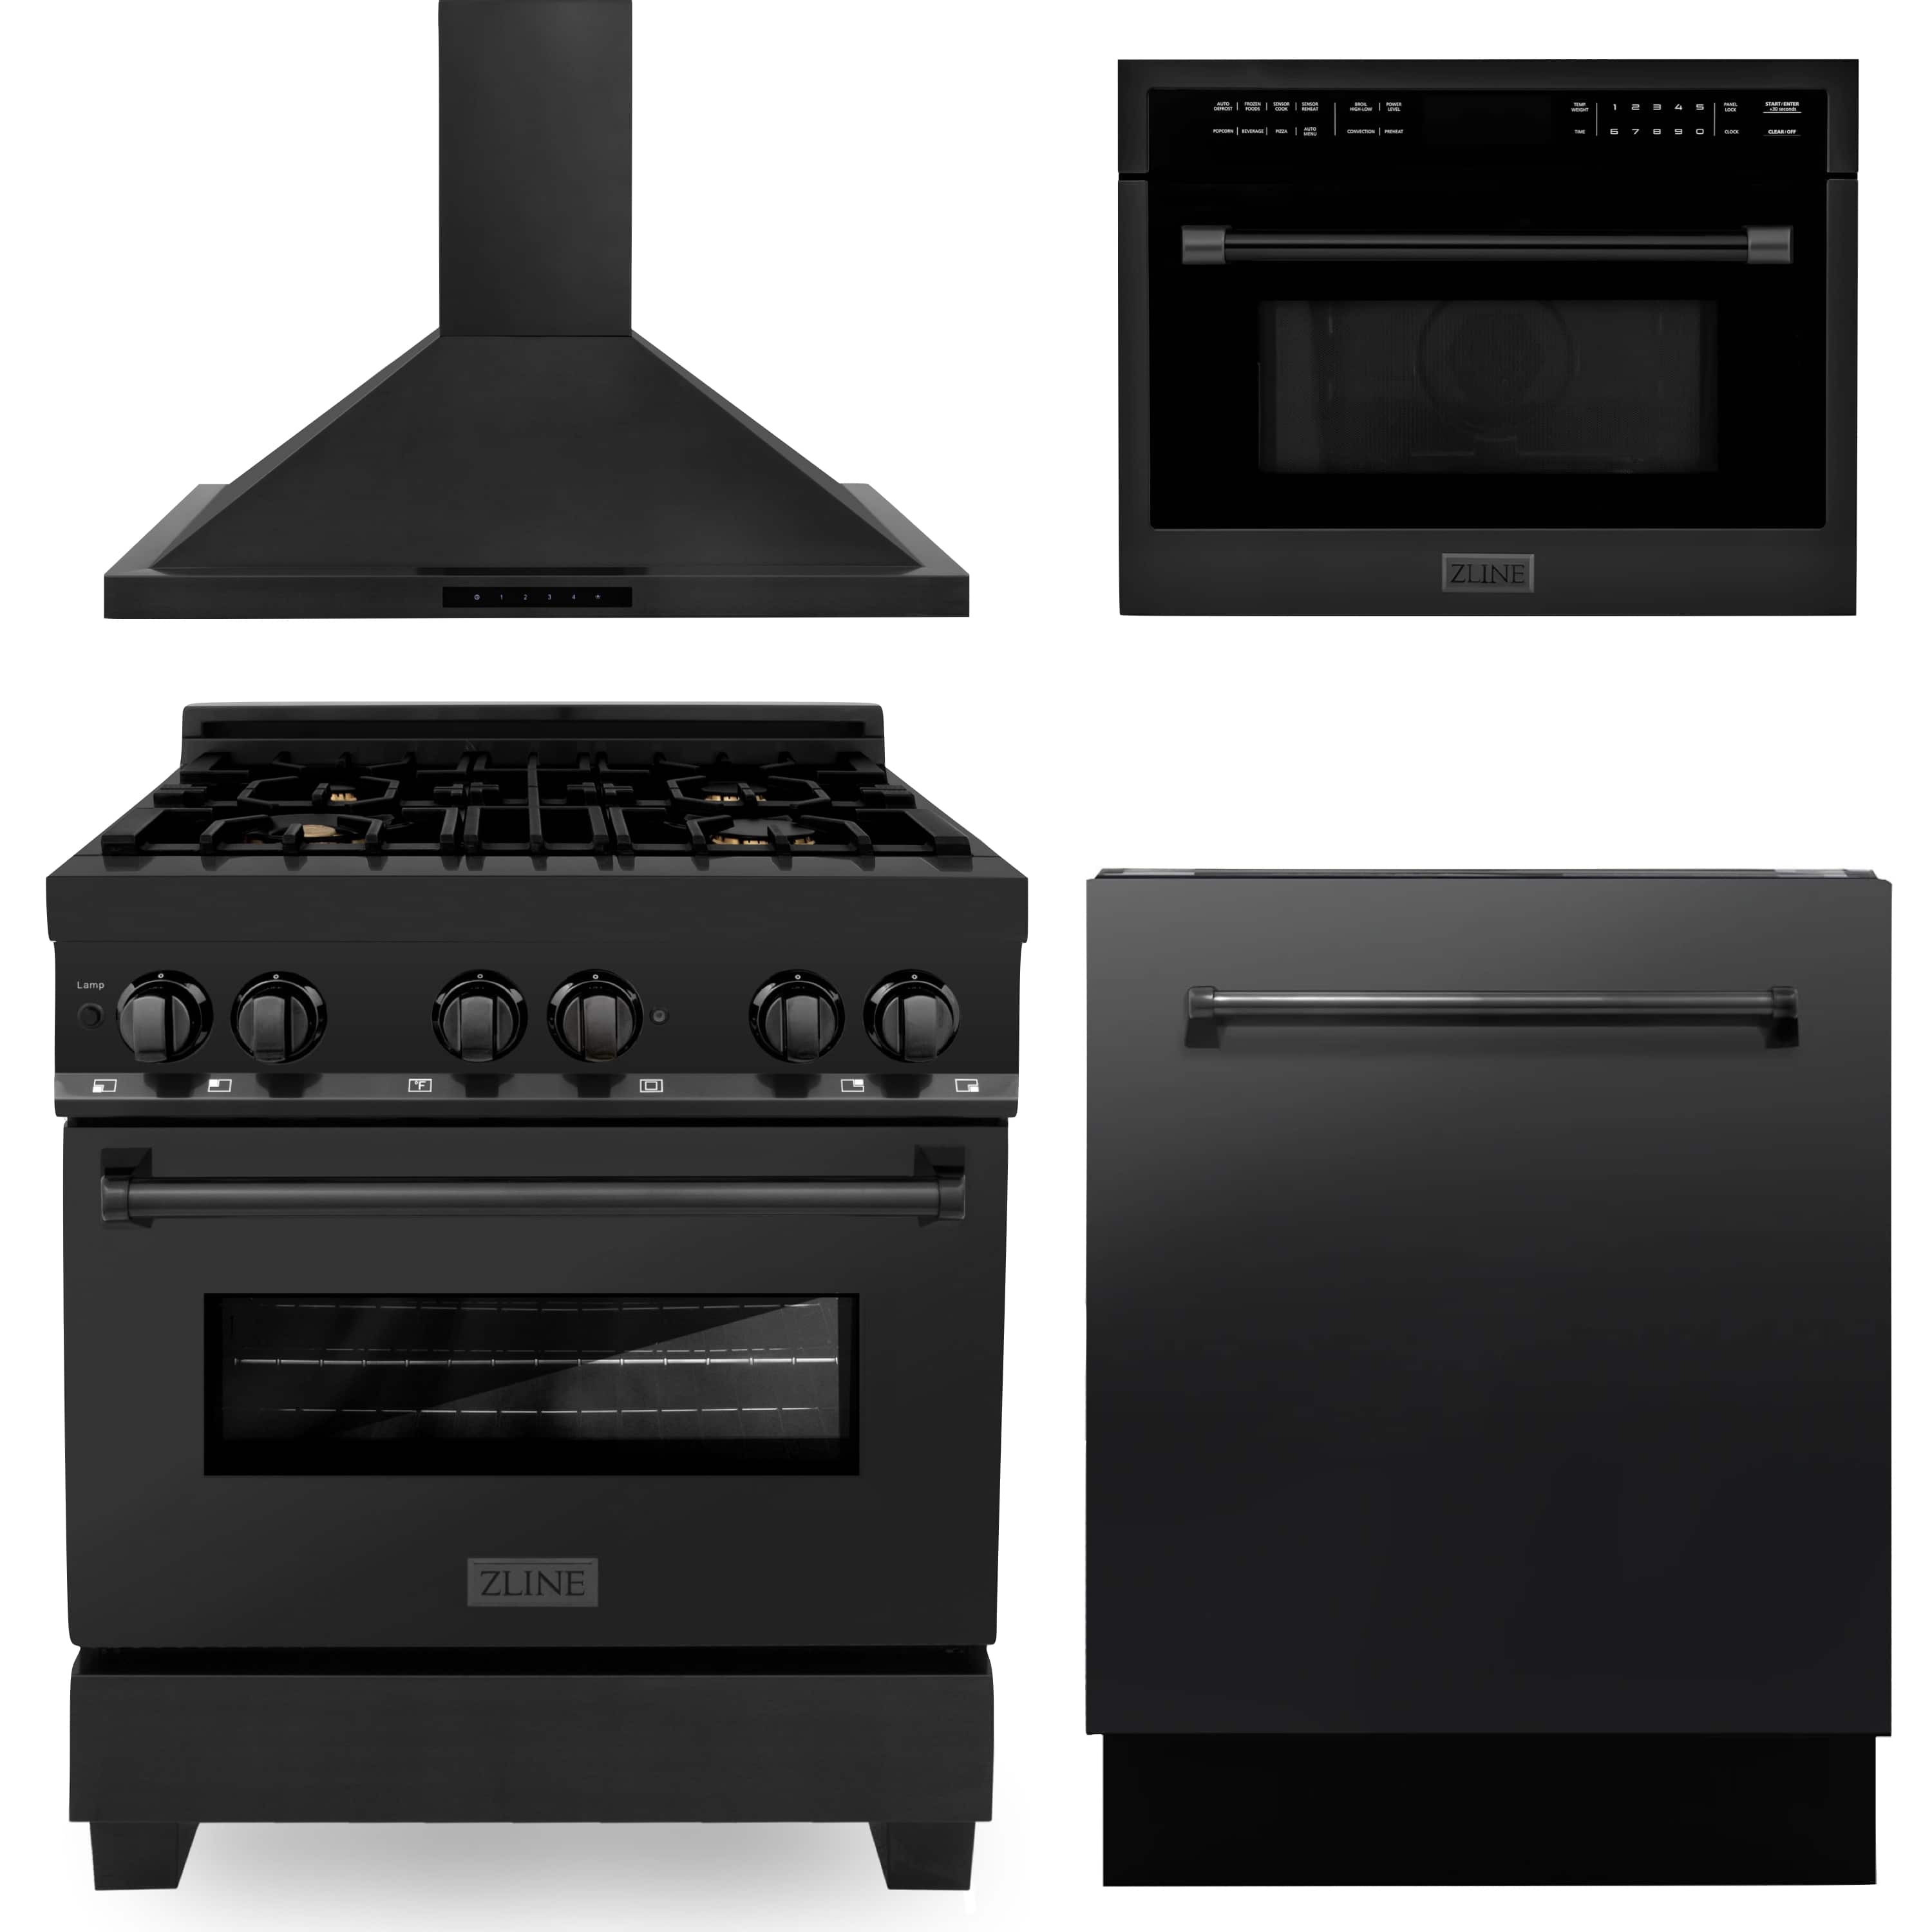 ZLINE 4-Piece Appliance Package - 30-Inch Dual Fuel Range with Brass Burners, Convertible Wall Mount Hood, Microwave Oven, and 3-Rack Dishwasher in Black Stainless Steel (4KP-RABRH30-MODWV)